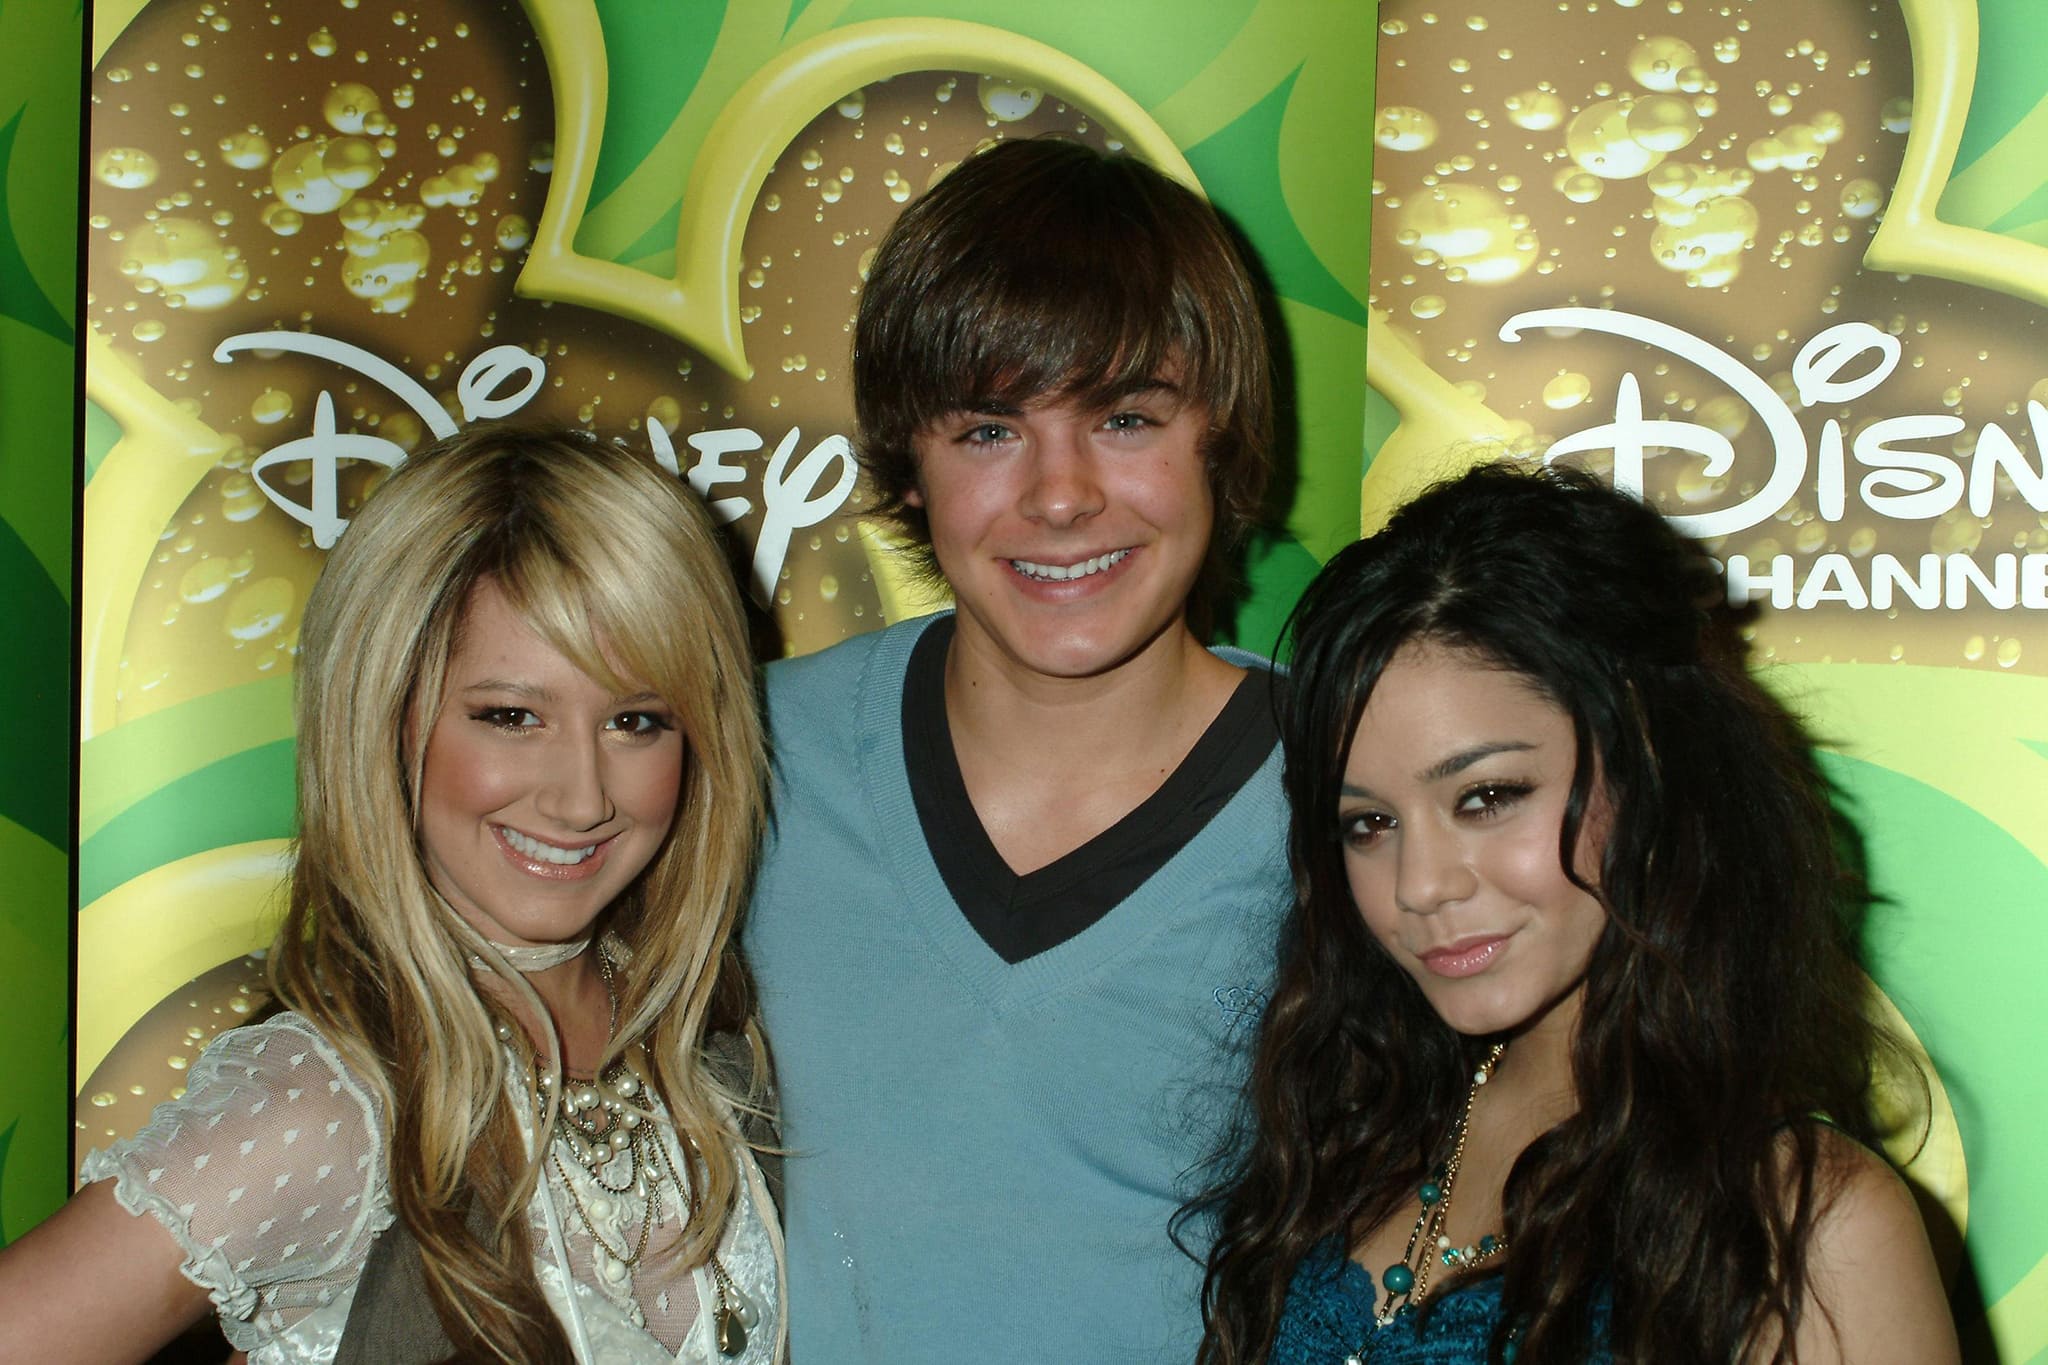 Zac Efron was linked to both Ashley Tisdale and Vanessa Hudgens while filming High School Musical